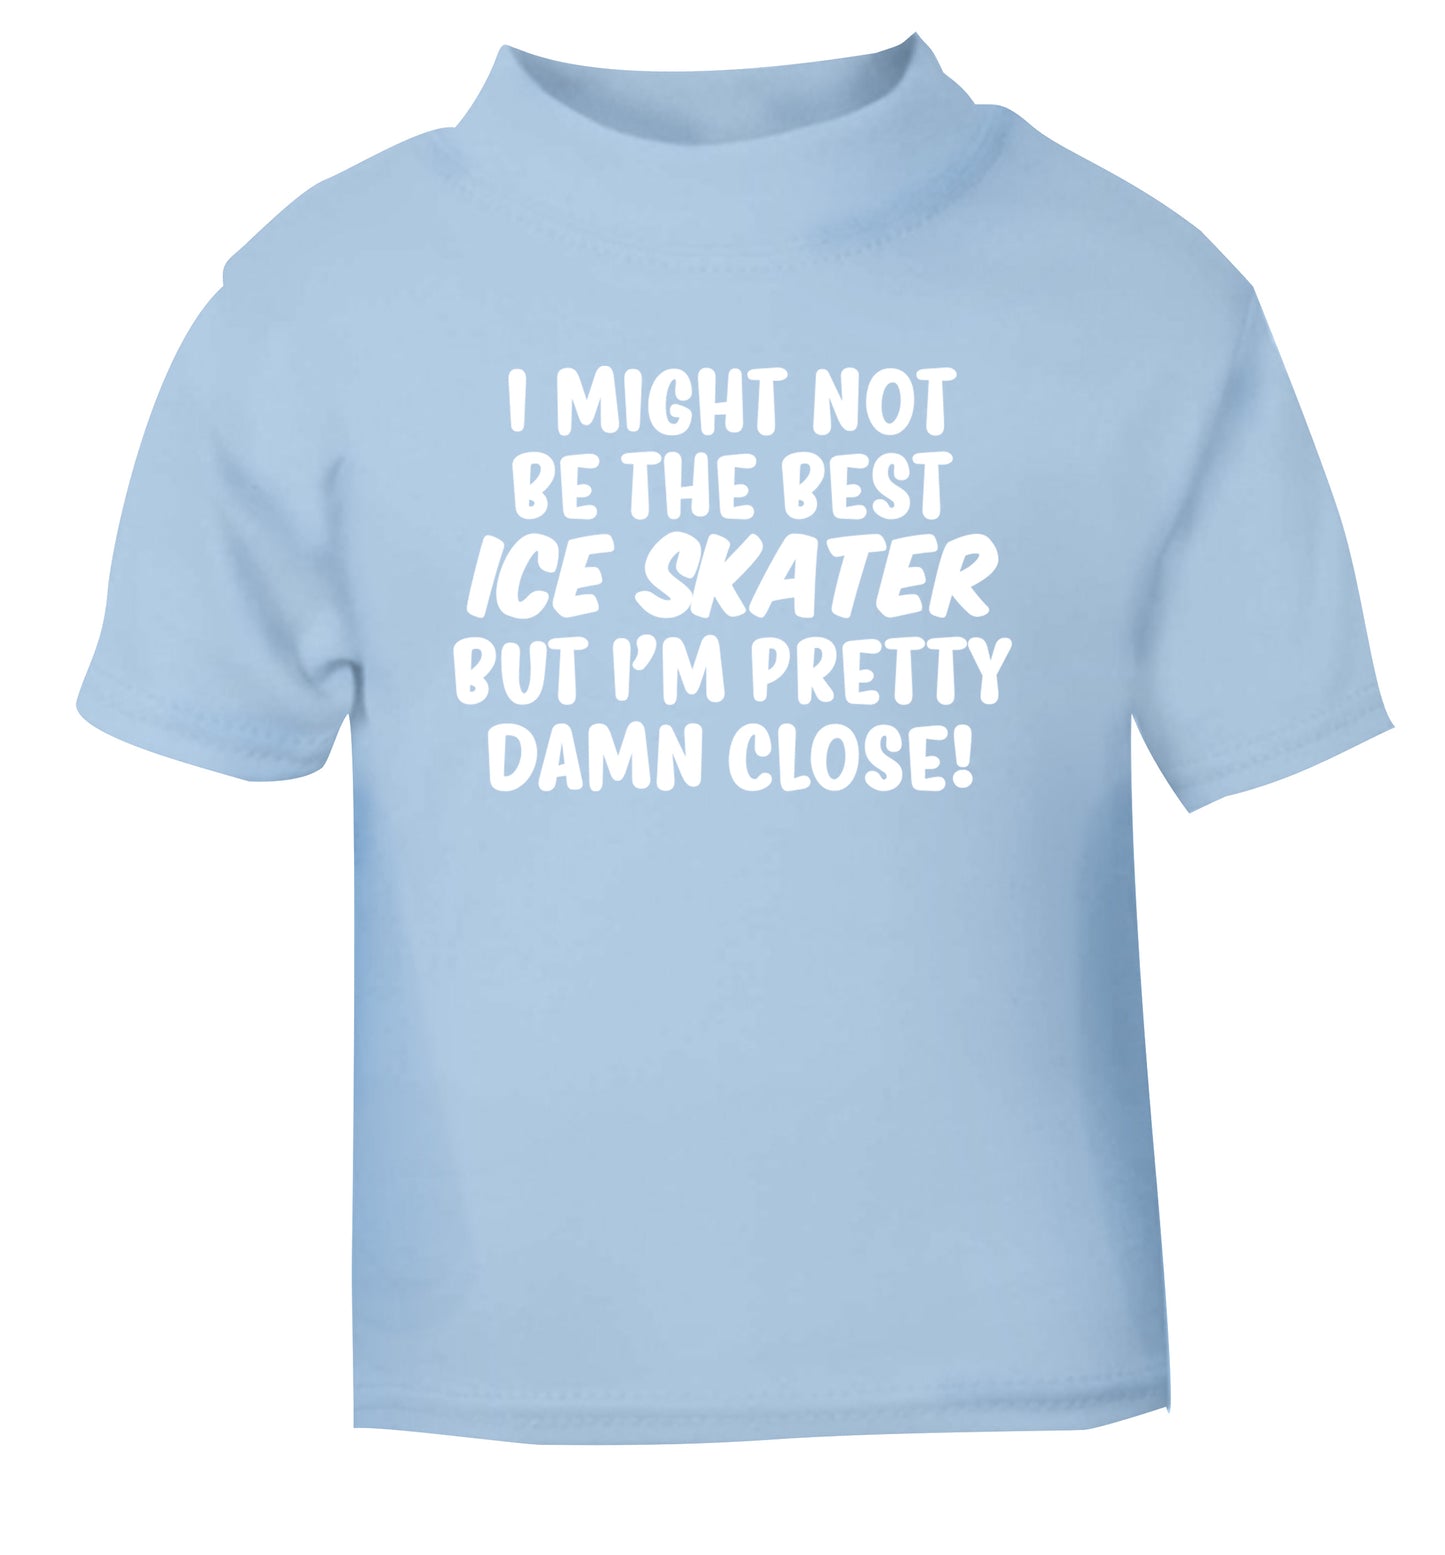 I might not be the best ice skater but I'm pretty damn close! light blue Baby Toddler Tshirt 2 Years